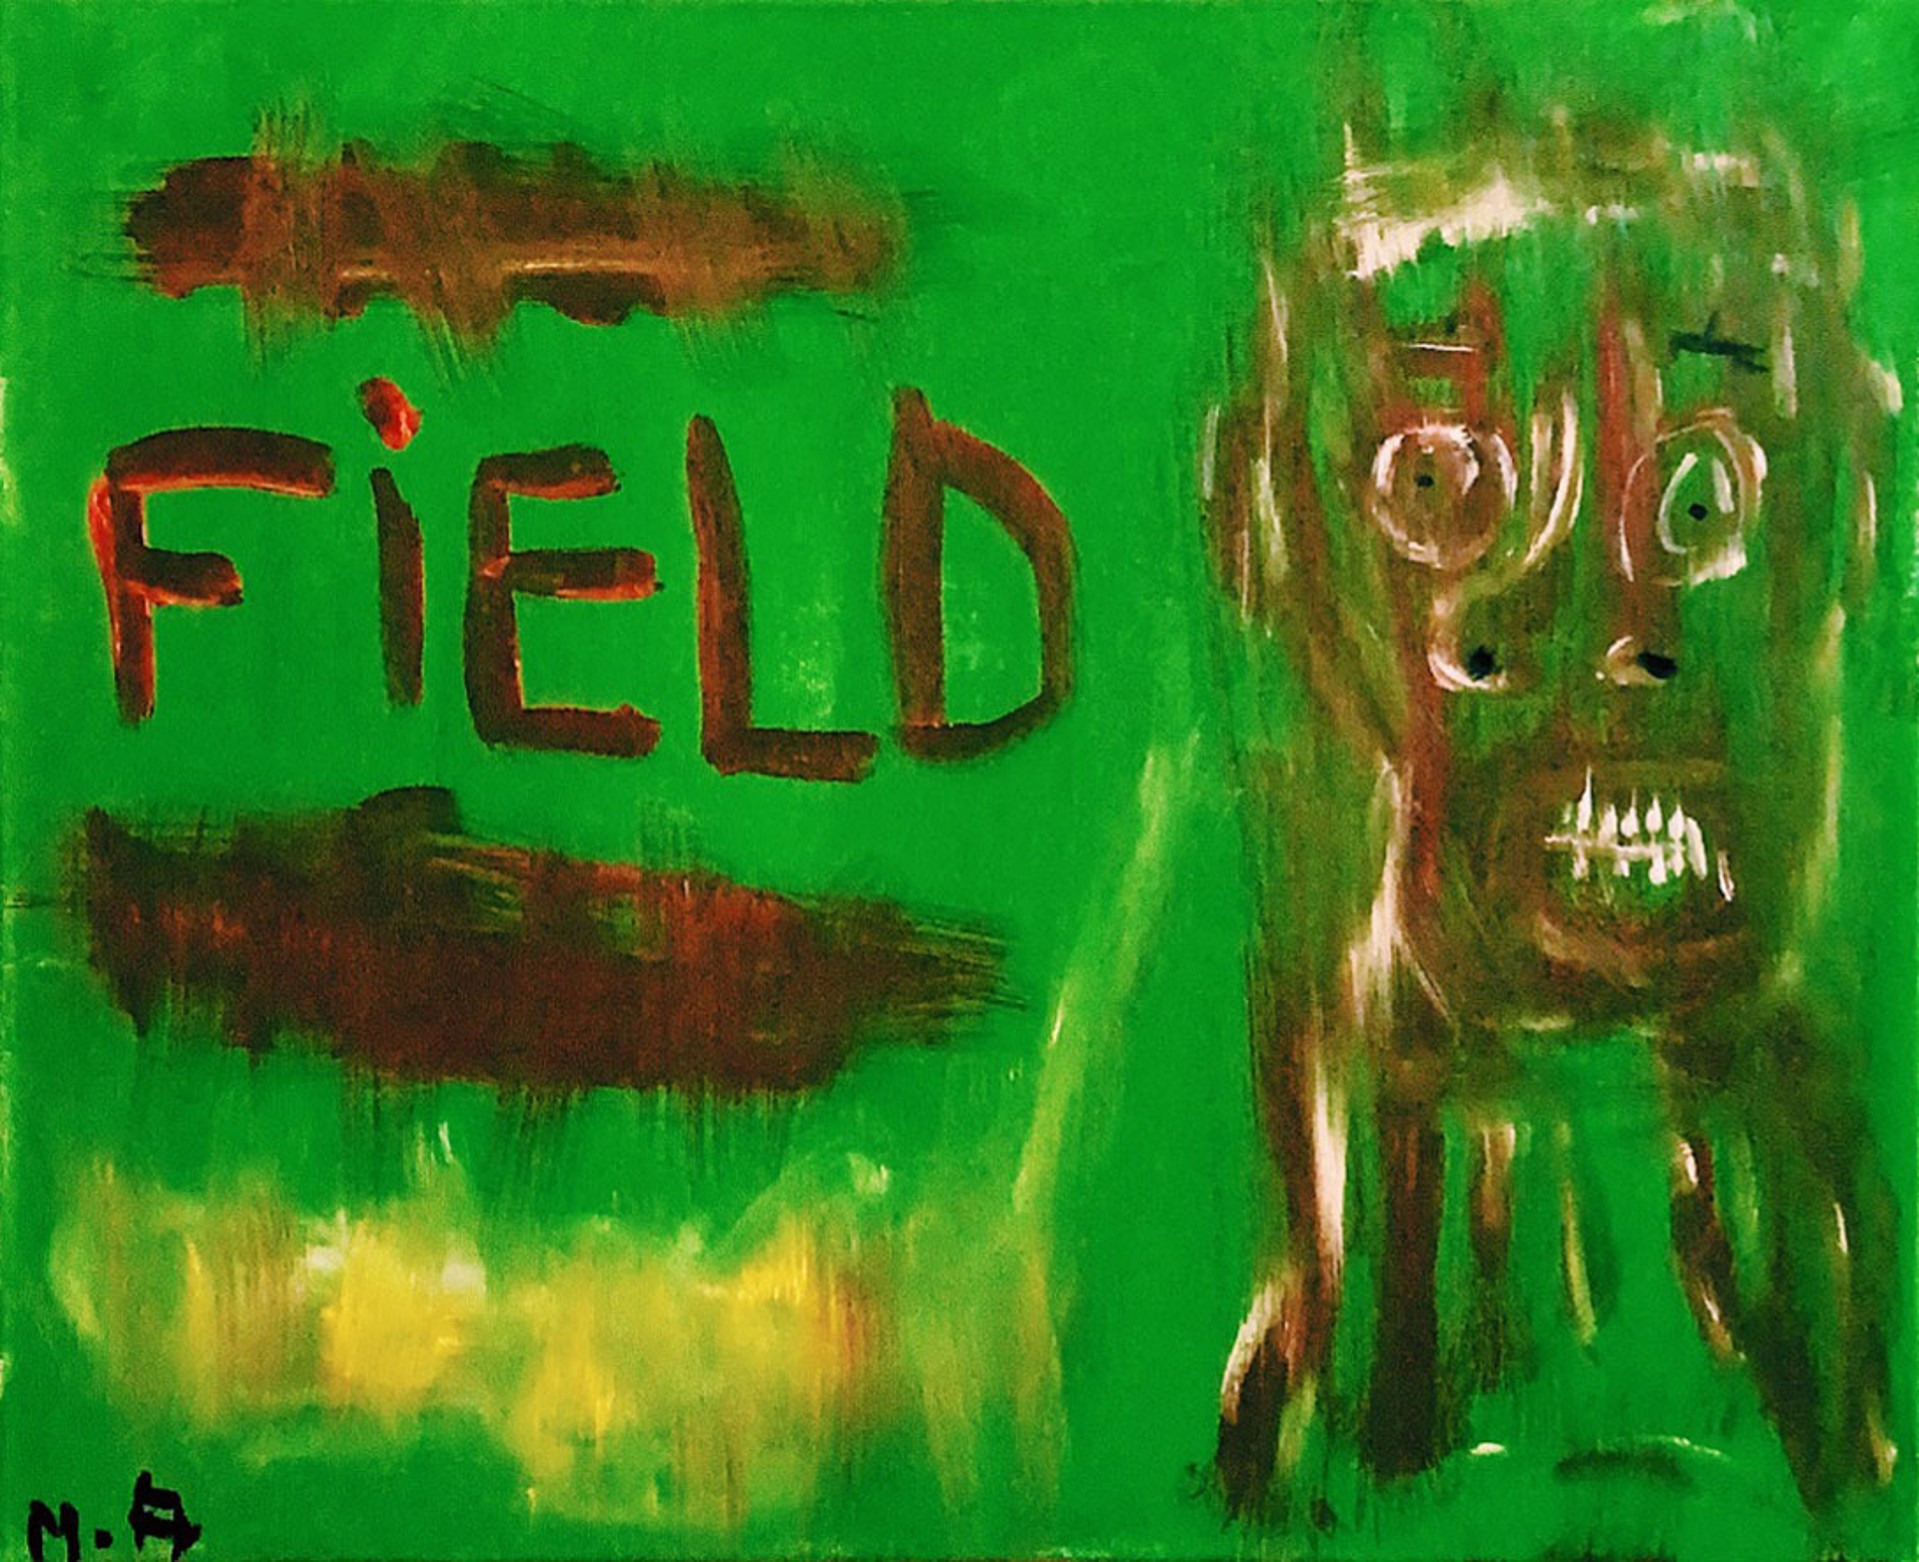 Untitled (field) by Marc Andre